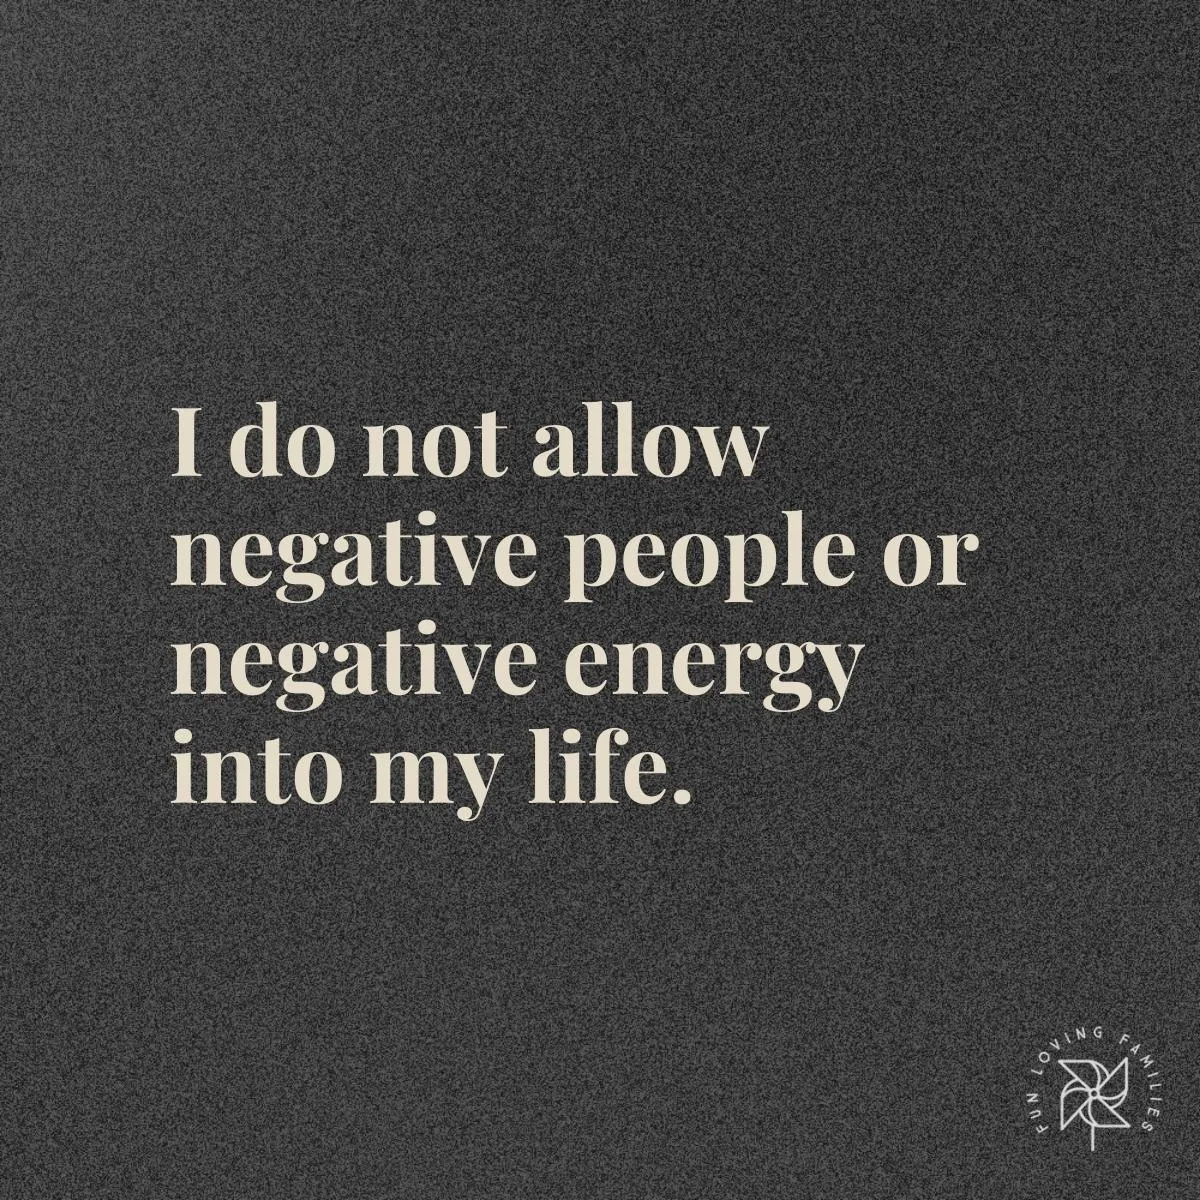 I do not allow negative people or negative energy into my life affirmation